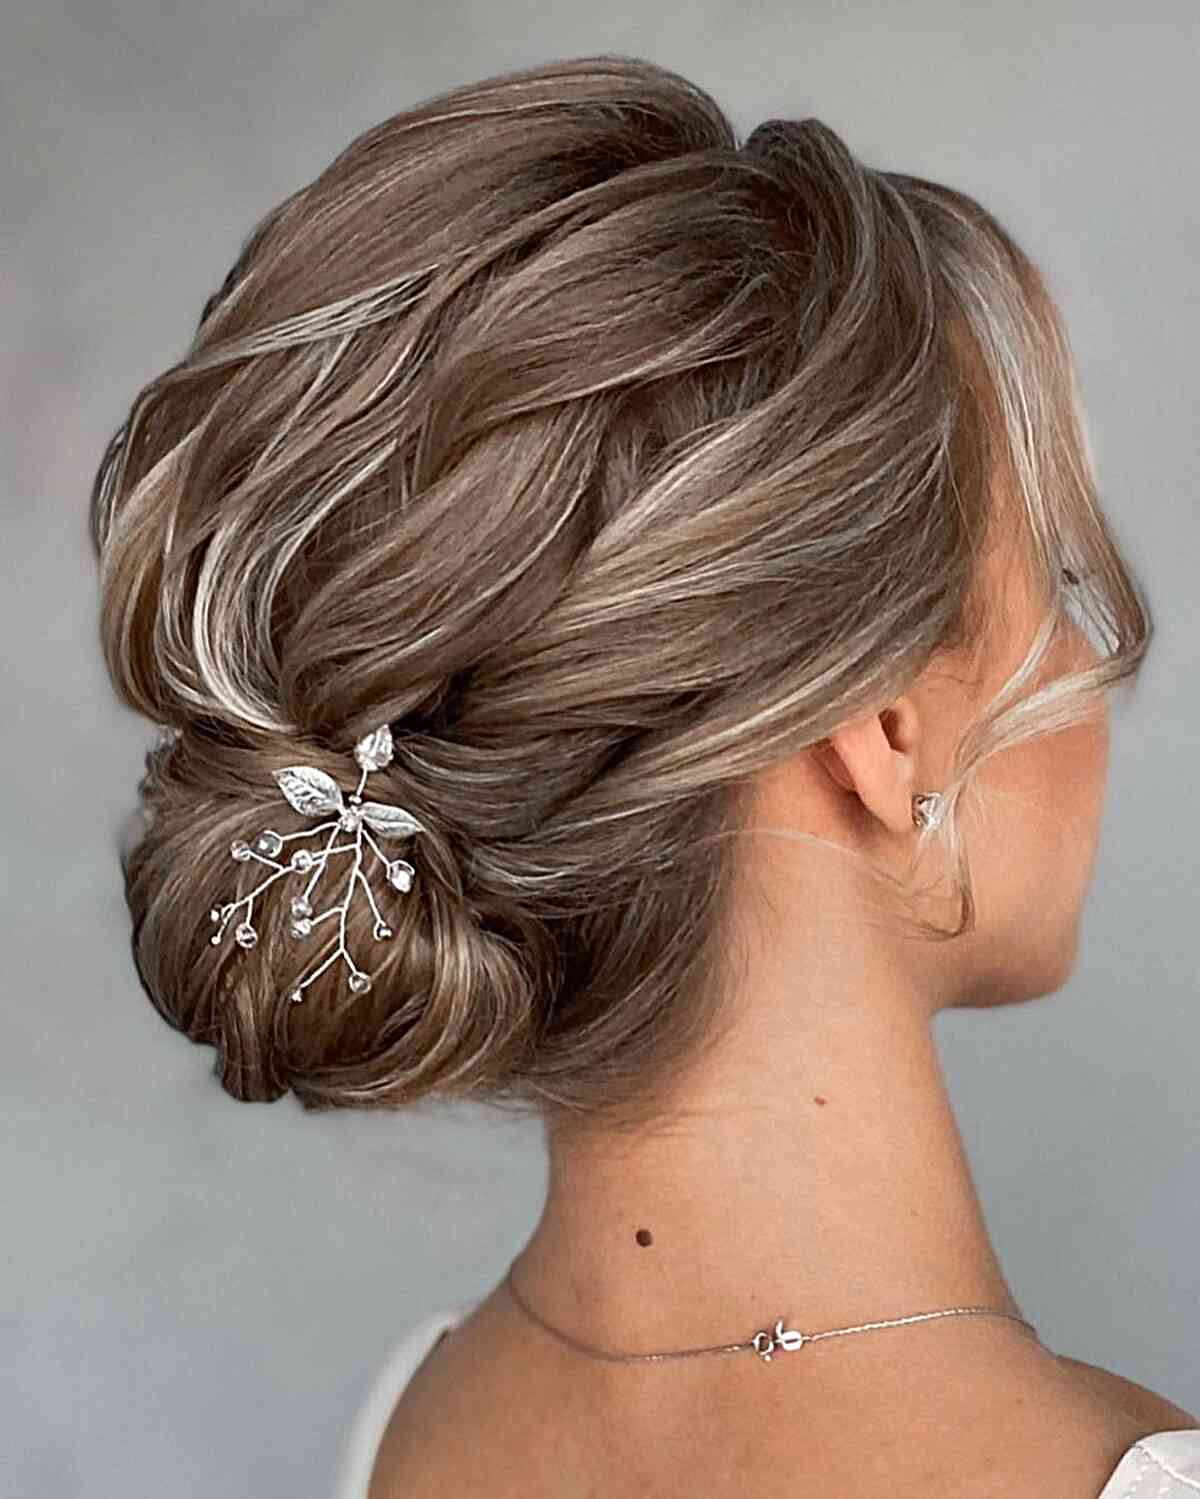 Intricate Bun Updo Hairstyle for girls with balayage hair